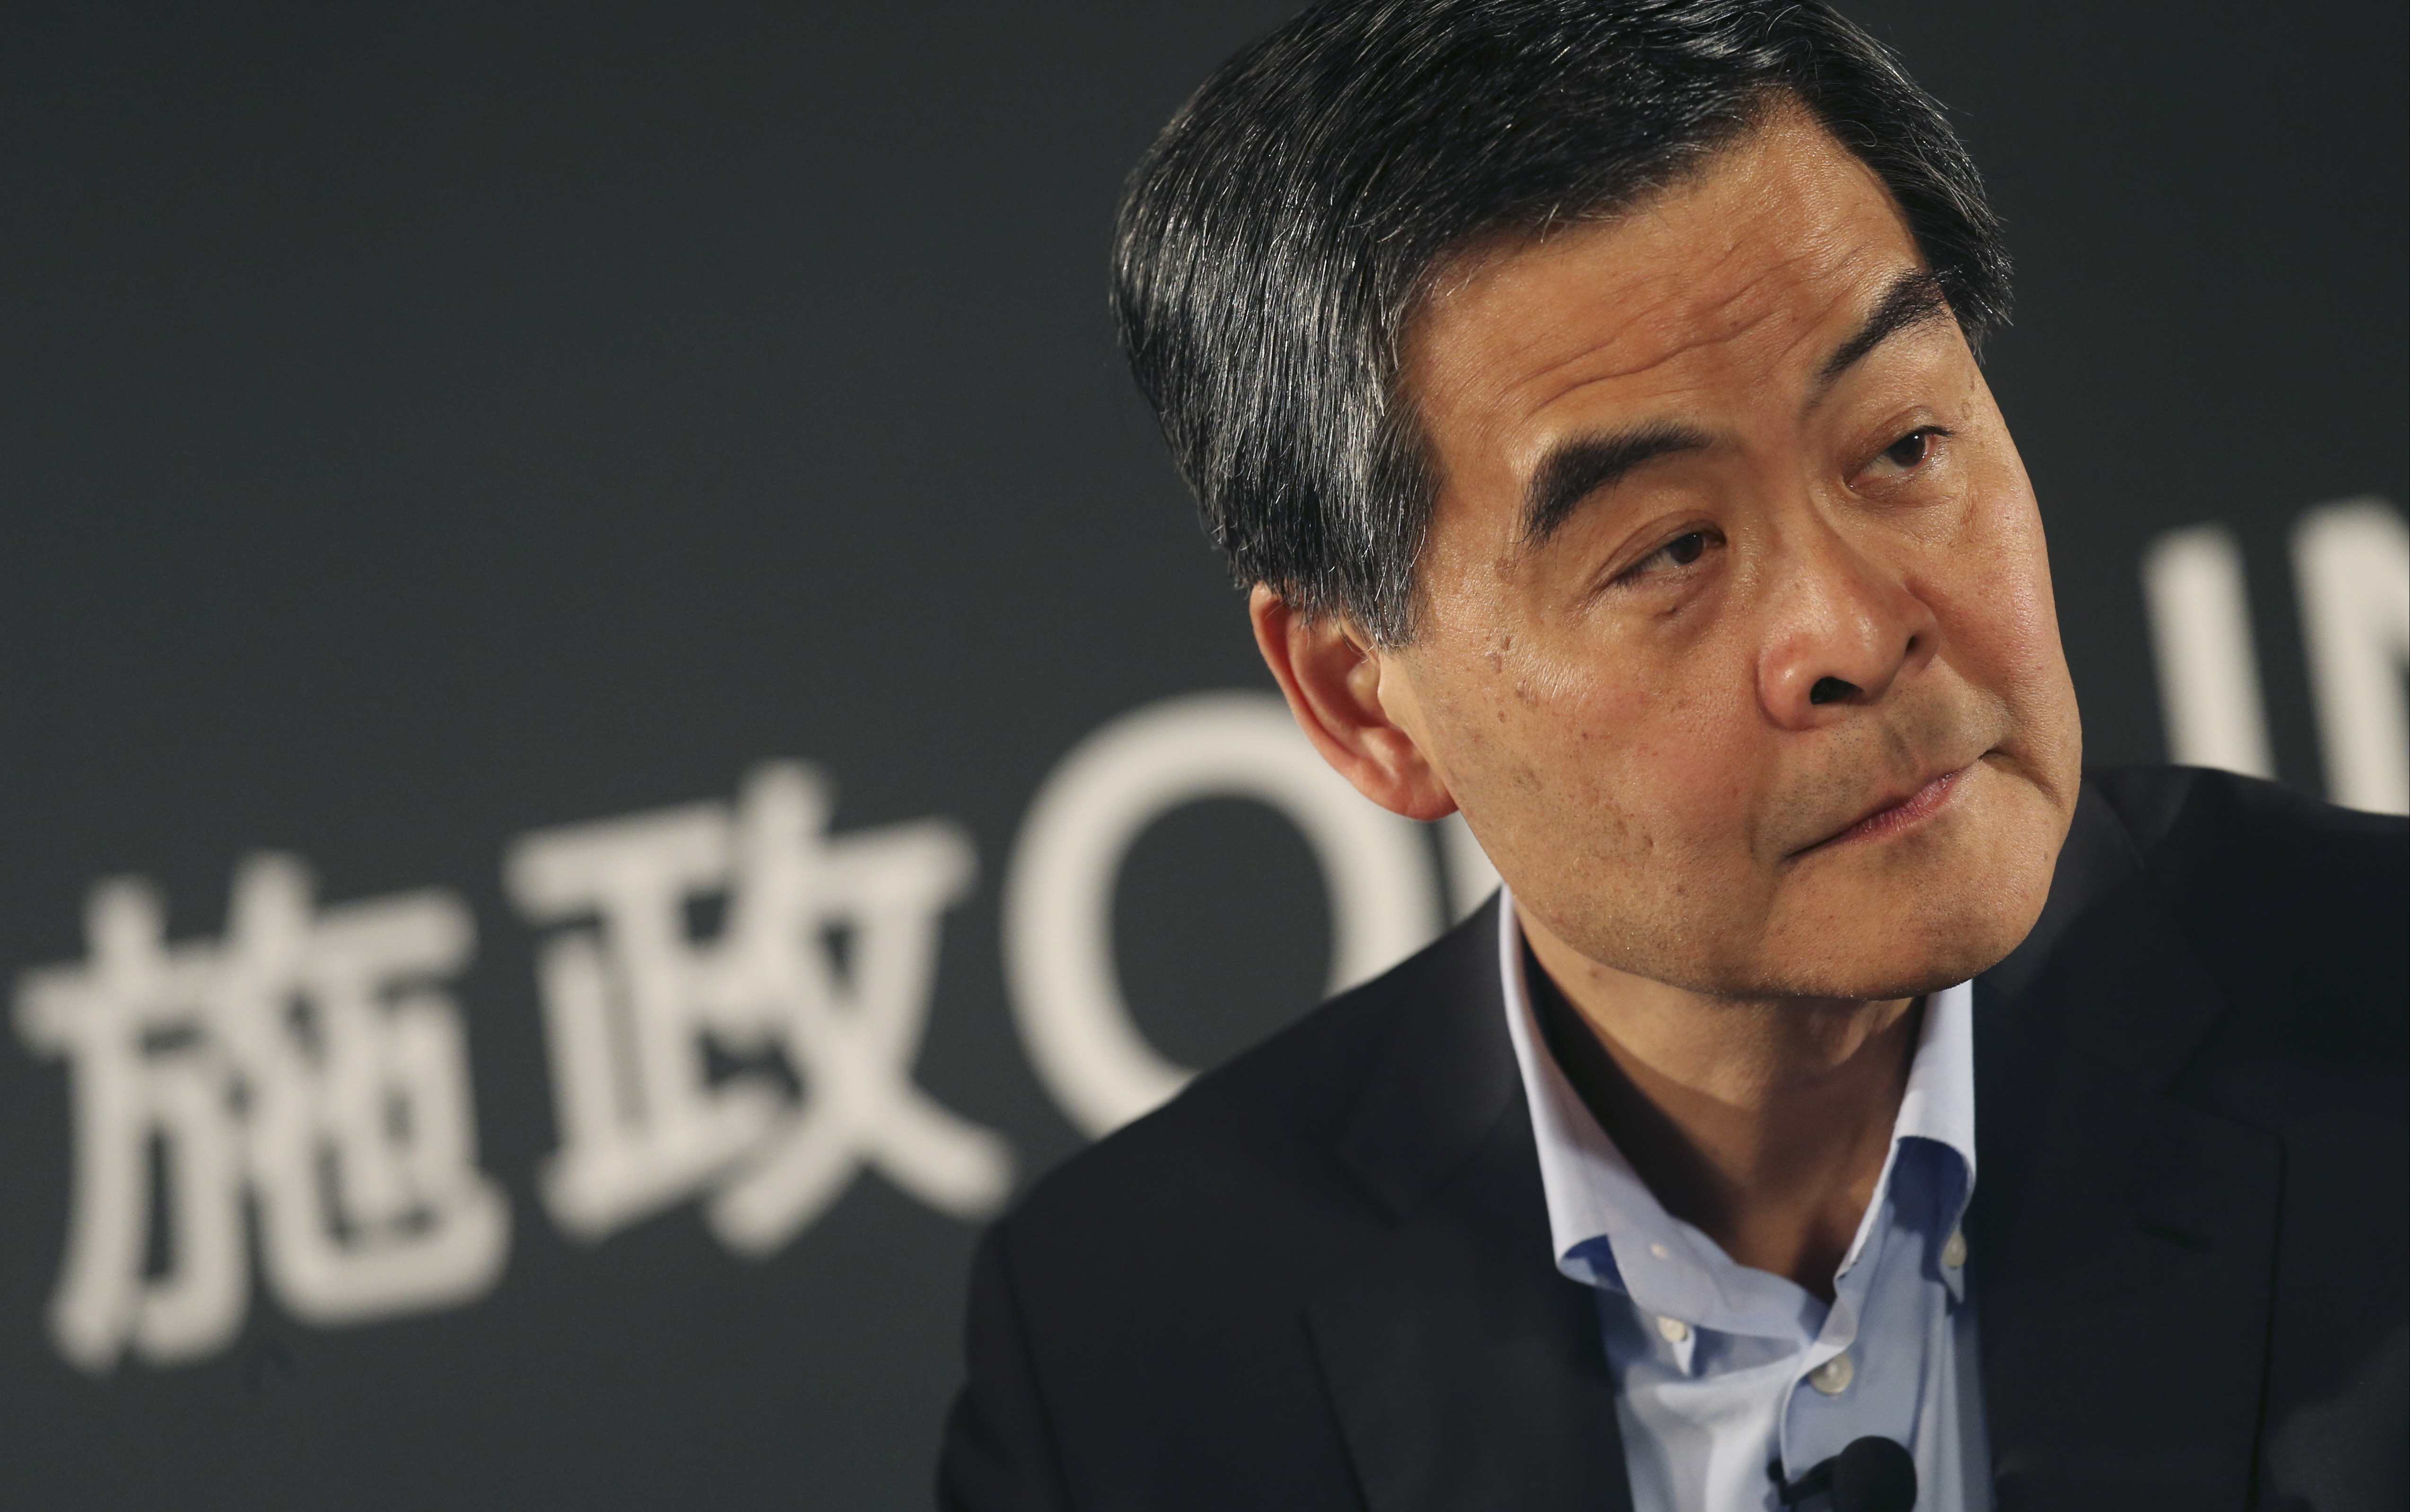 The Chief Executive, Leung Chun Ying, to deliver opening remarks at Policy Address forum on innovation and technology organised by Hong Kong Federation of Youth Groups at M21, Shek Pai Wan Shopping Centre, Aberdeen. 20JAN16 SCMP/David Wong